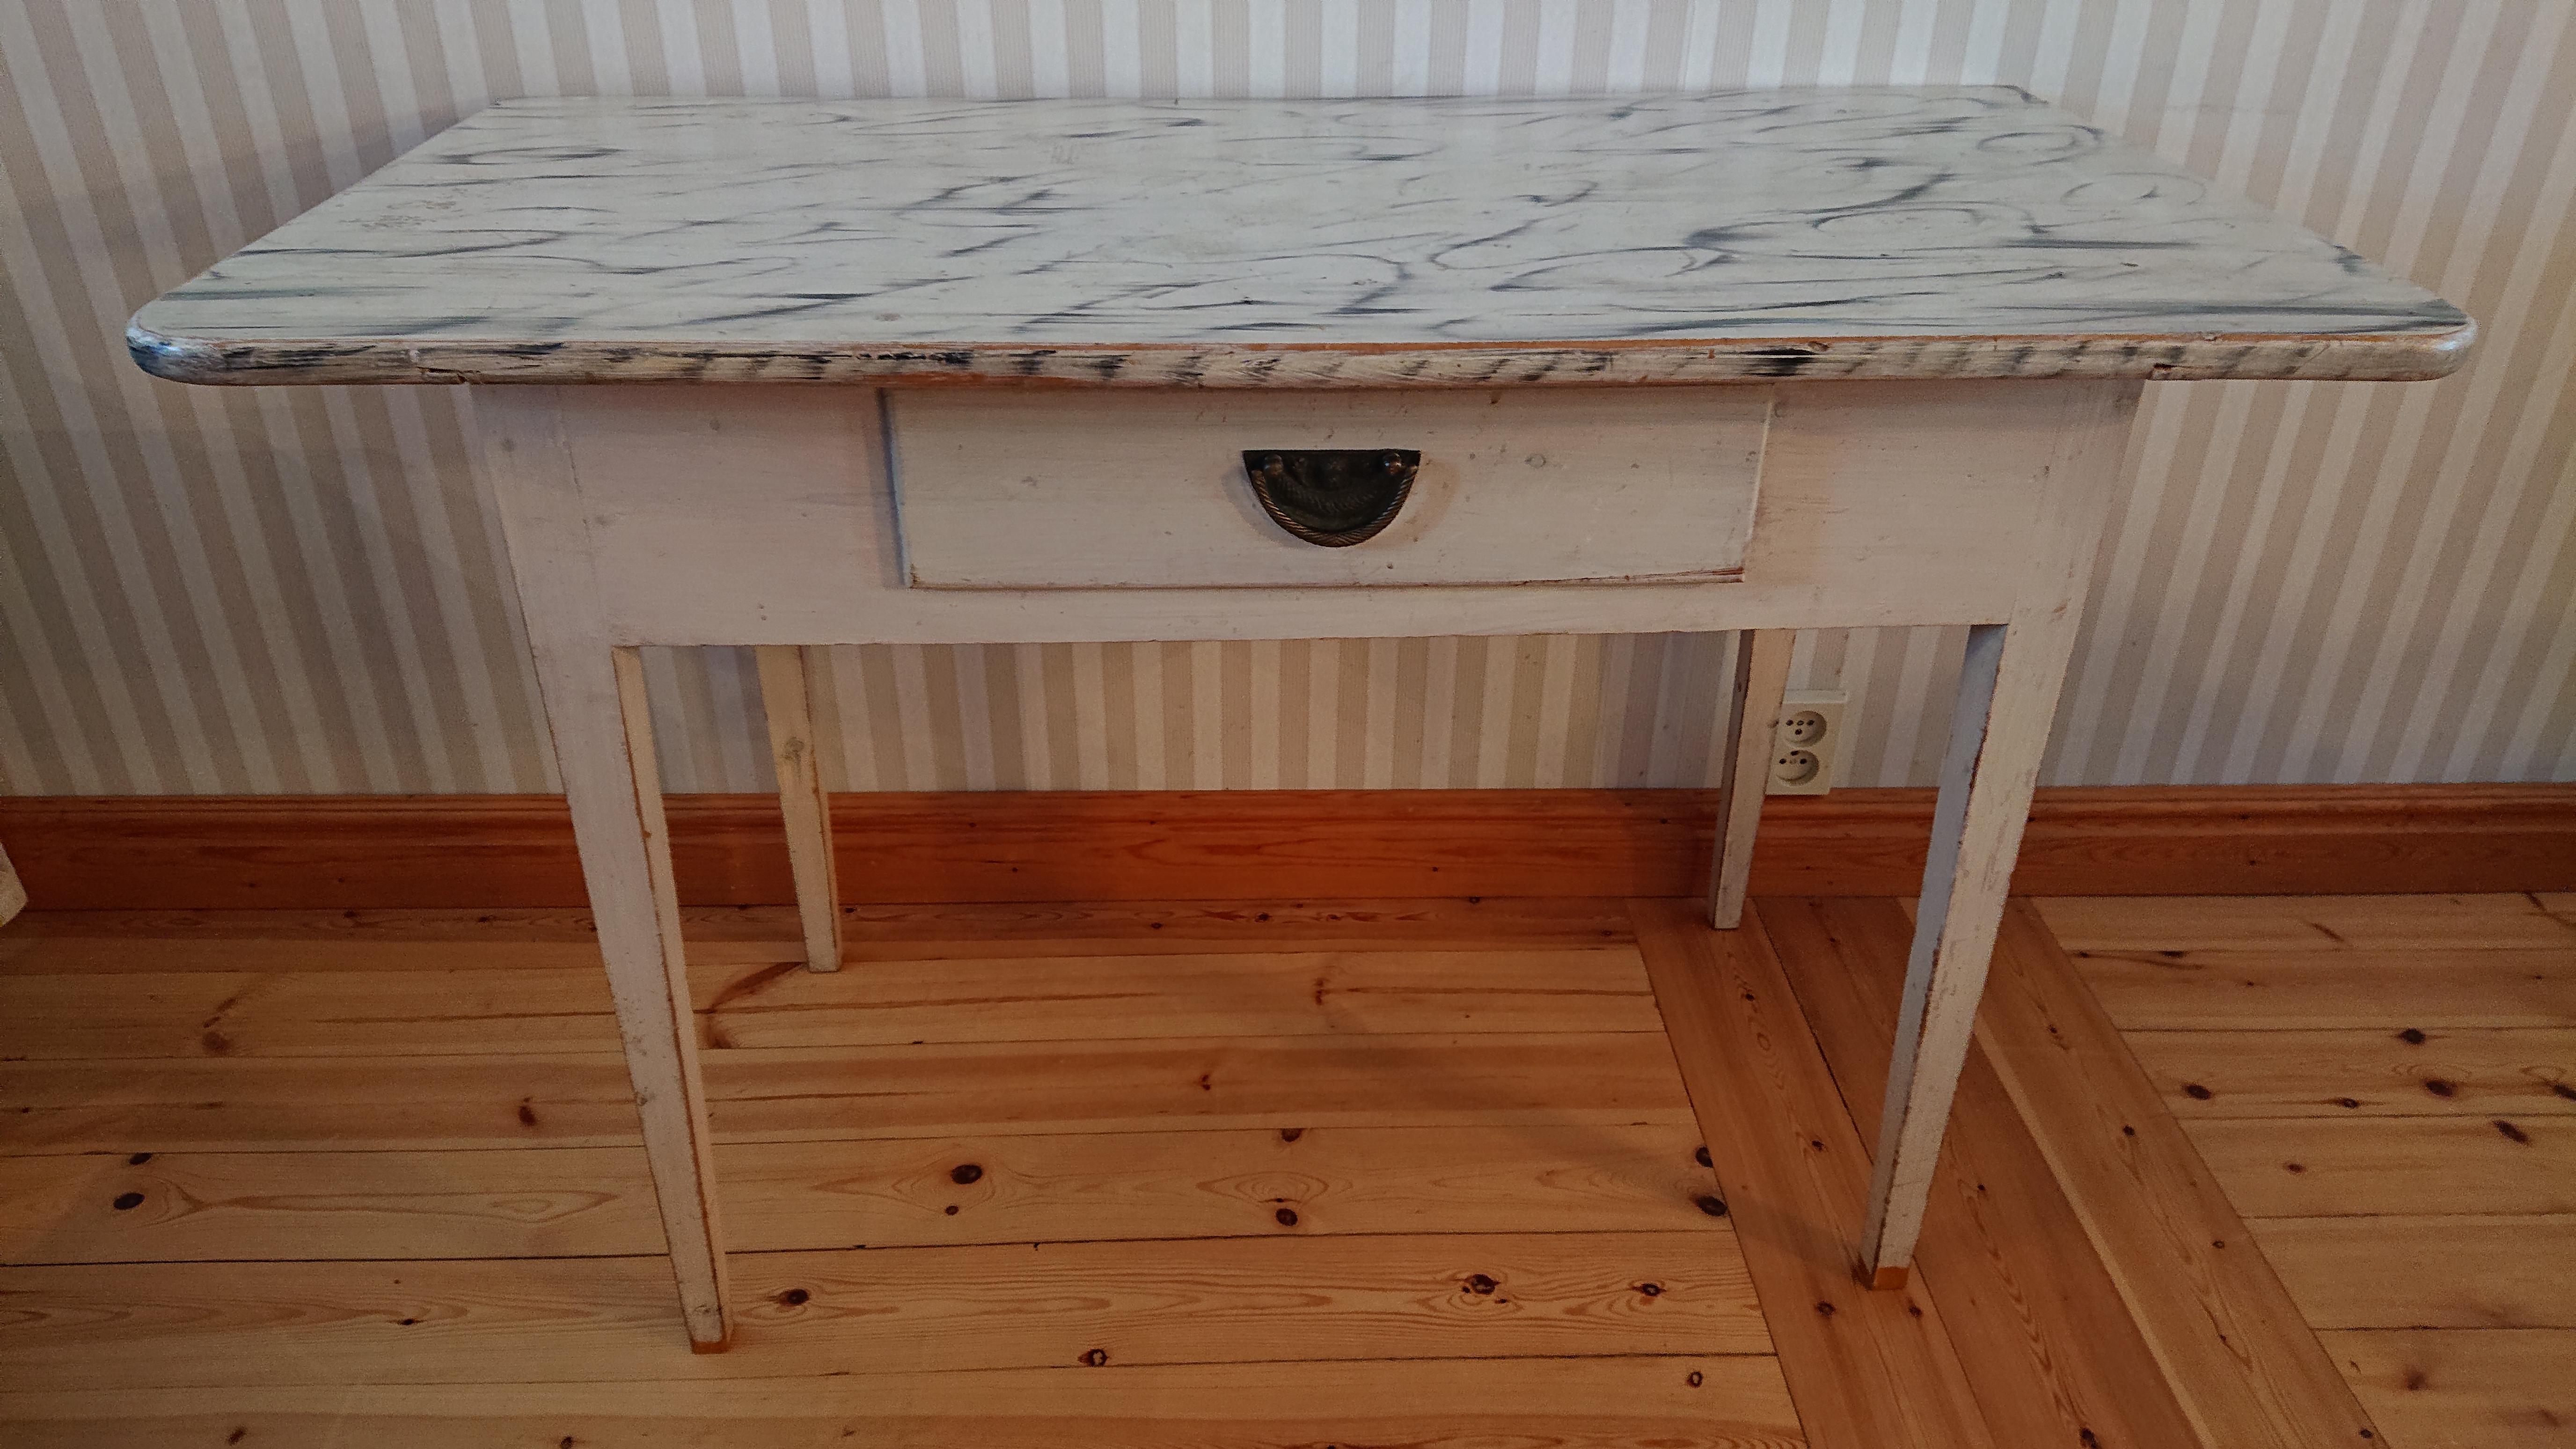 19th Century Swedish desk from Skelleftea Vasterbotten, Northern Sweden.
Untouched originalpaint with fantastic Marble paint on table top.
Made in painted Pine.
 